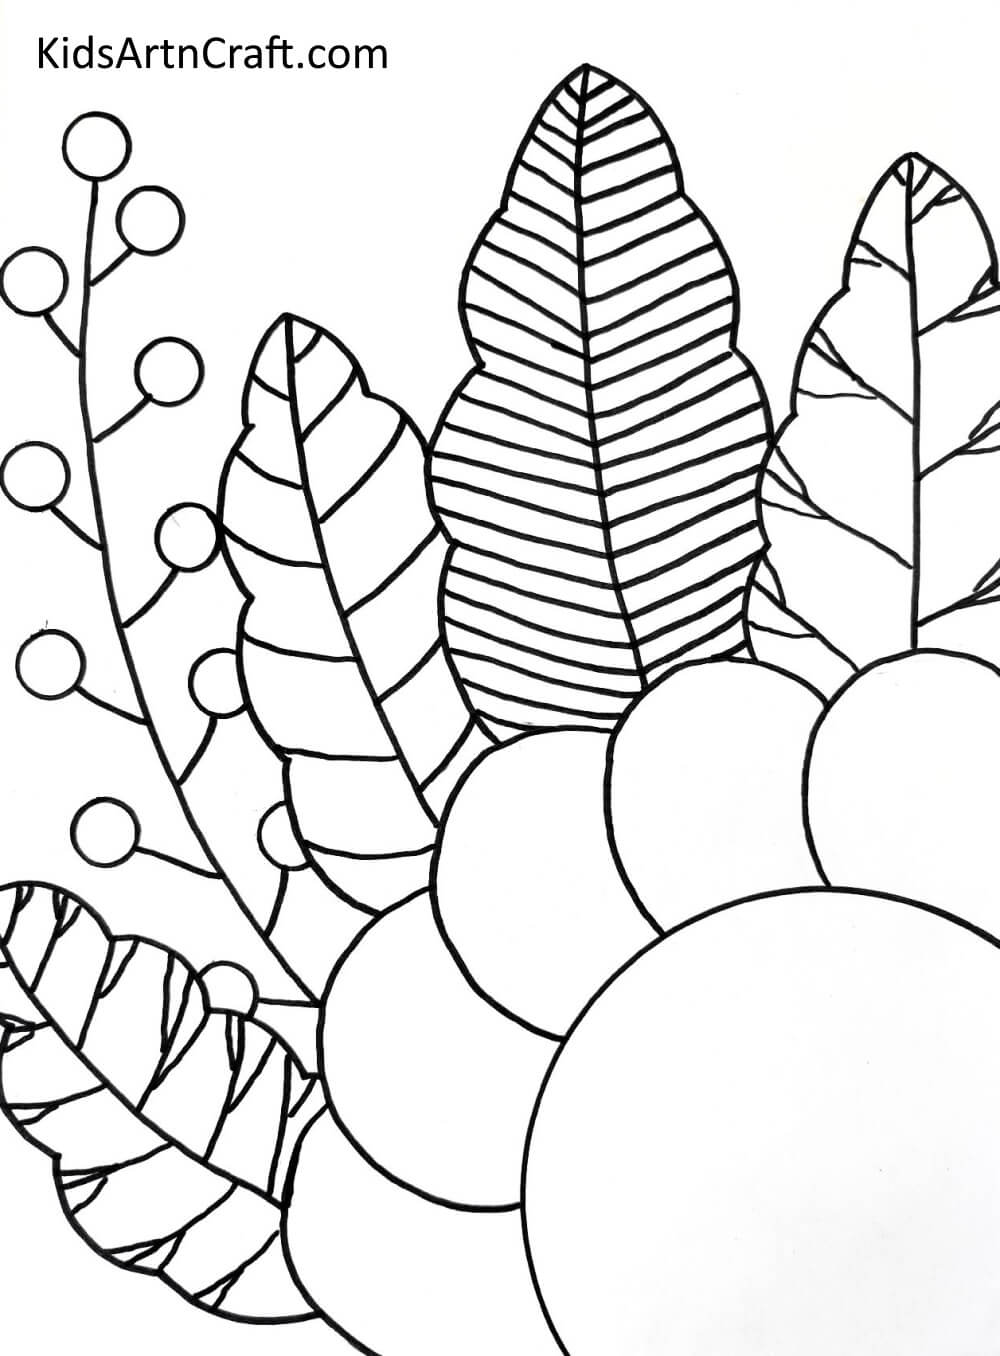 Drawing Details Creating a Ladybug on Leaves Picture - A Kid-friendly Tutorial 